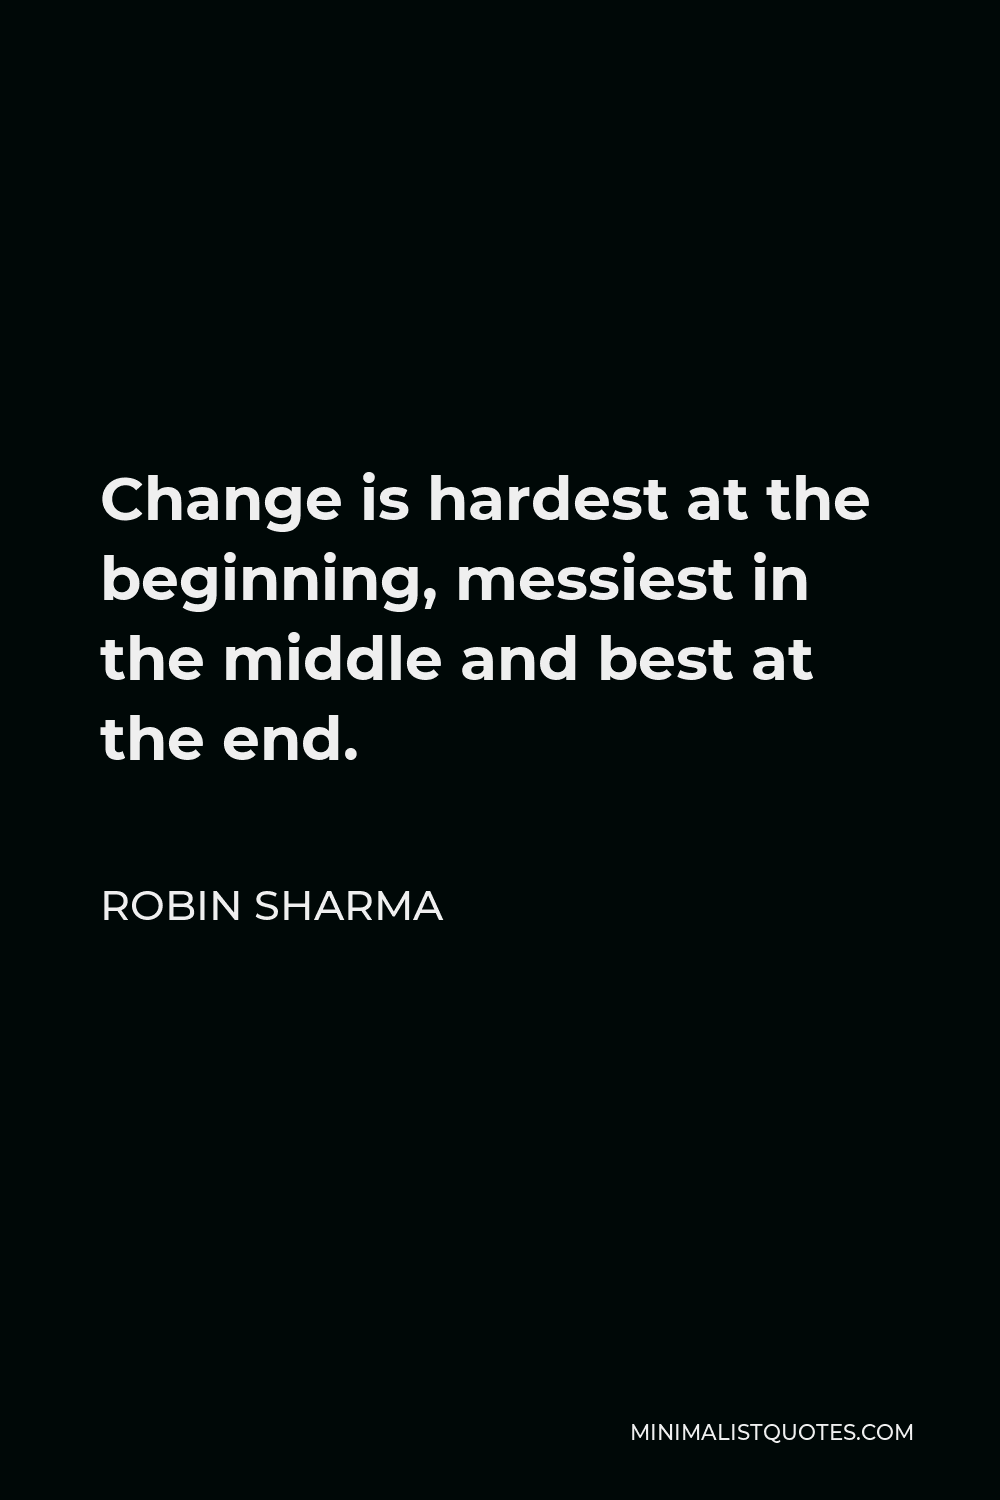 Robin Sharma Quote - Change is hardest at the beginning, messiest in the middle and best at the end.